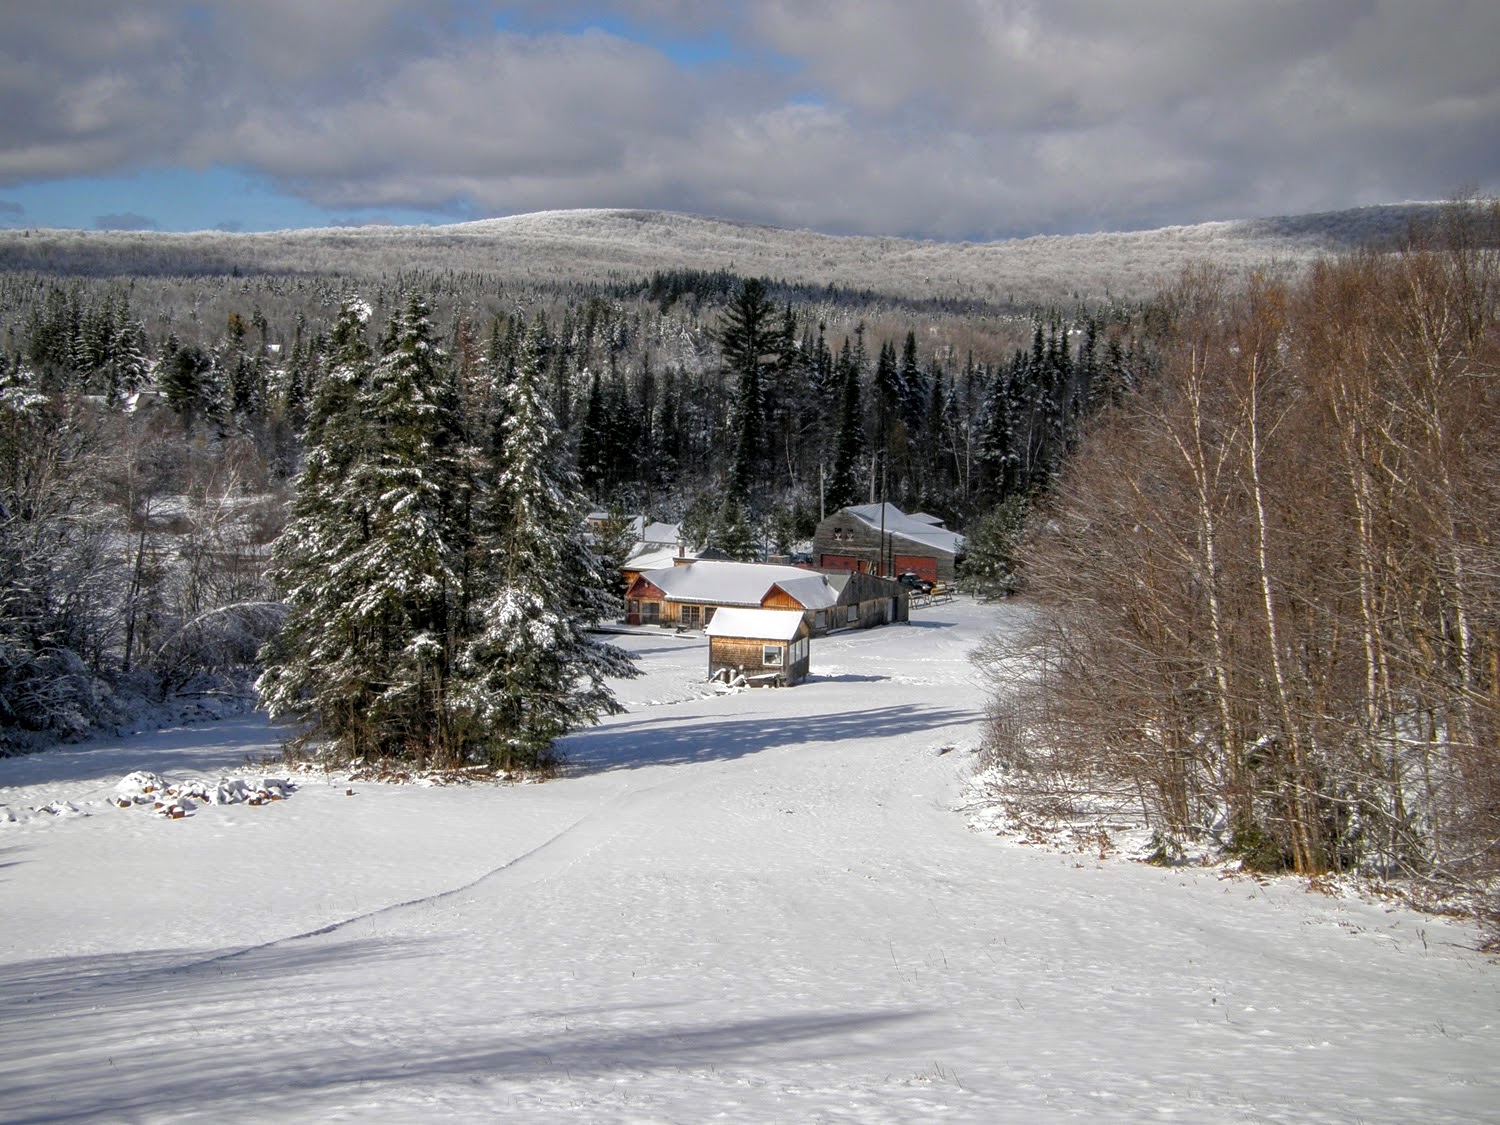 Highest Nordic Base Lodge in Vermont